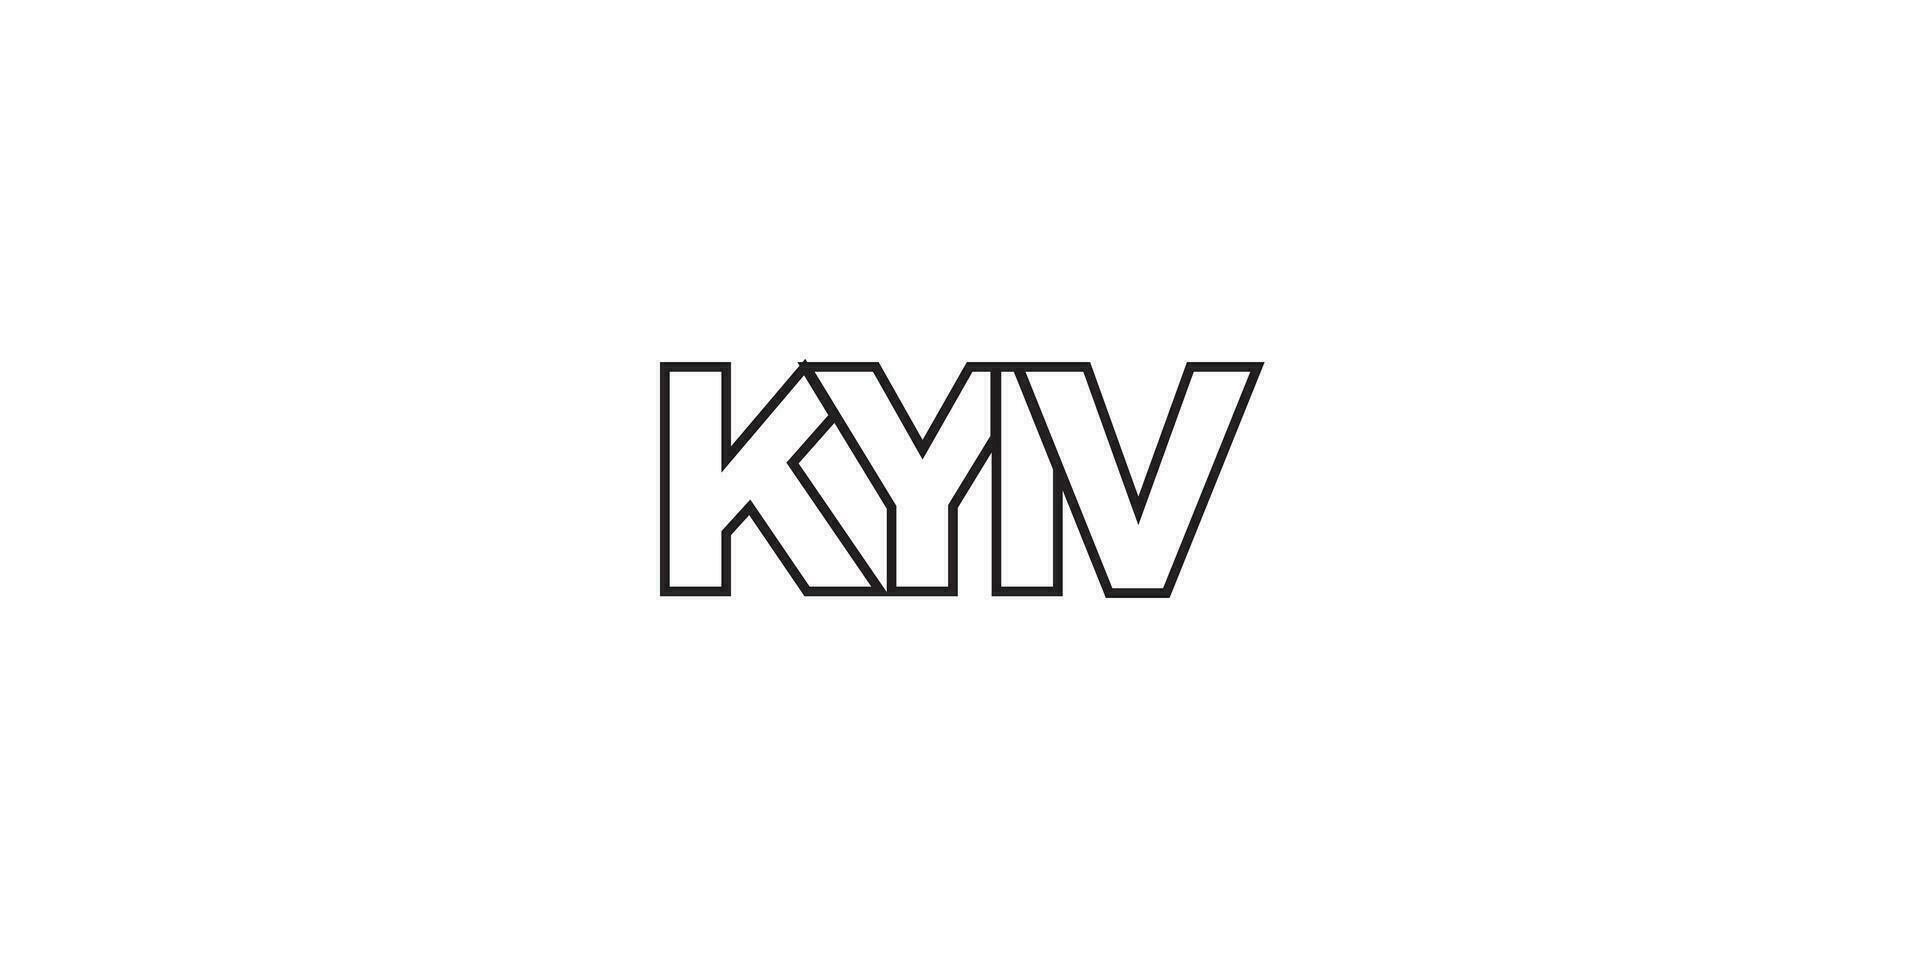 Kyiv in the Ukraine emblem. The design features a geometric style, vector illustration with bold typography in a modern font. The graphic slogan lettering.